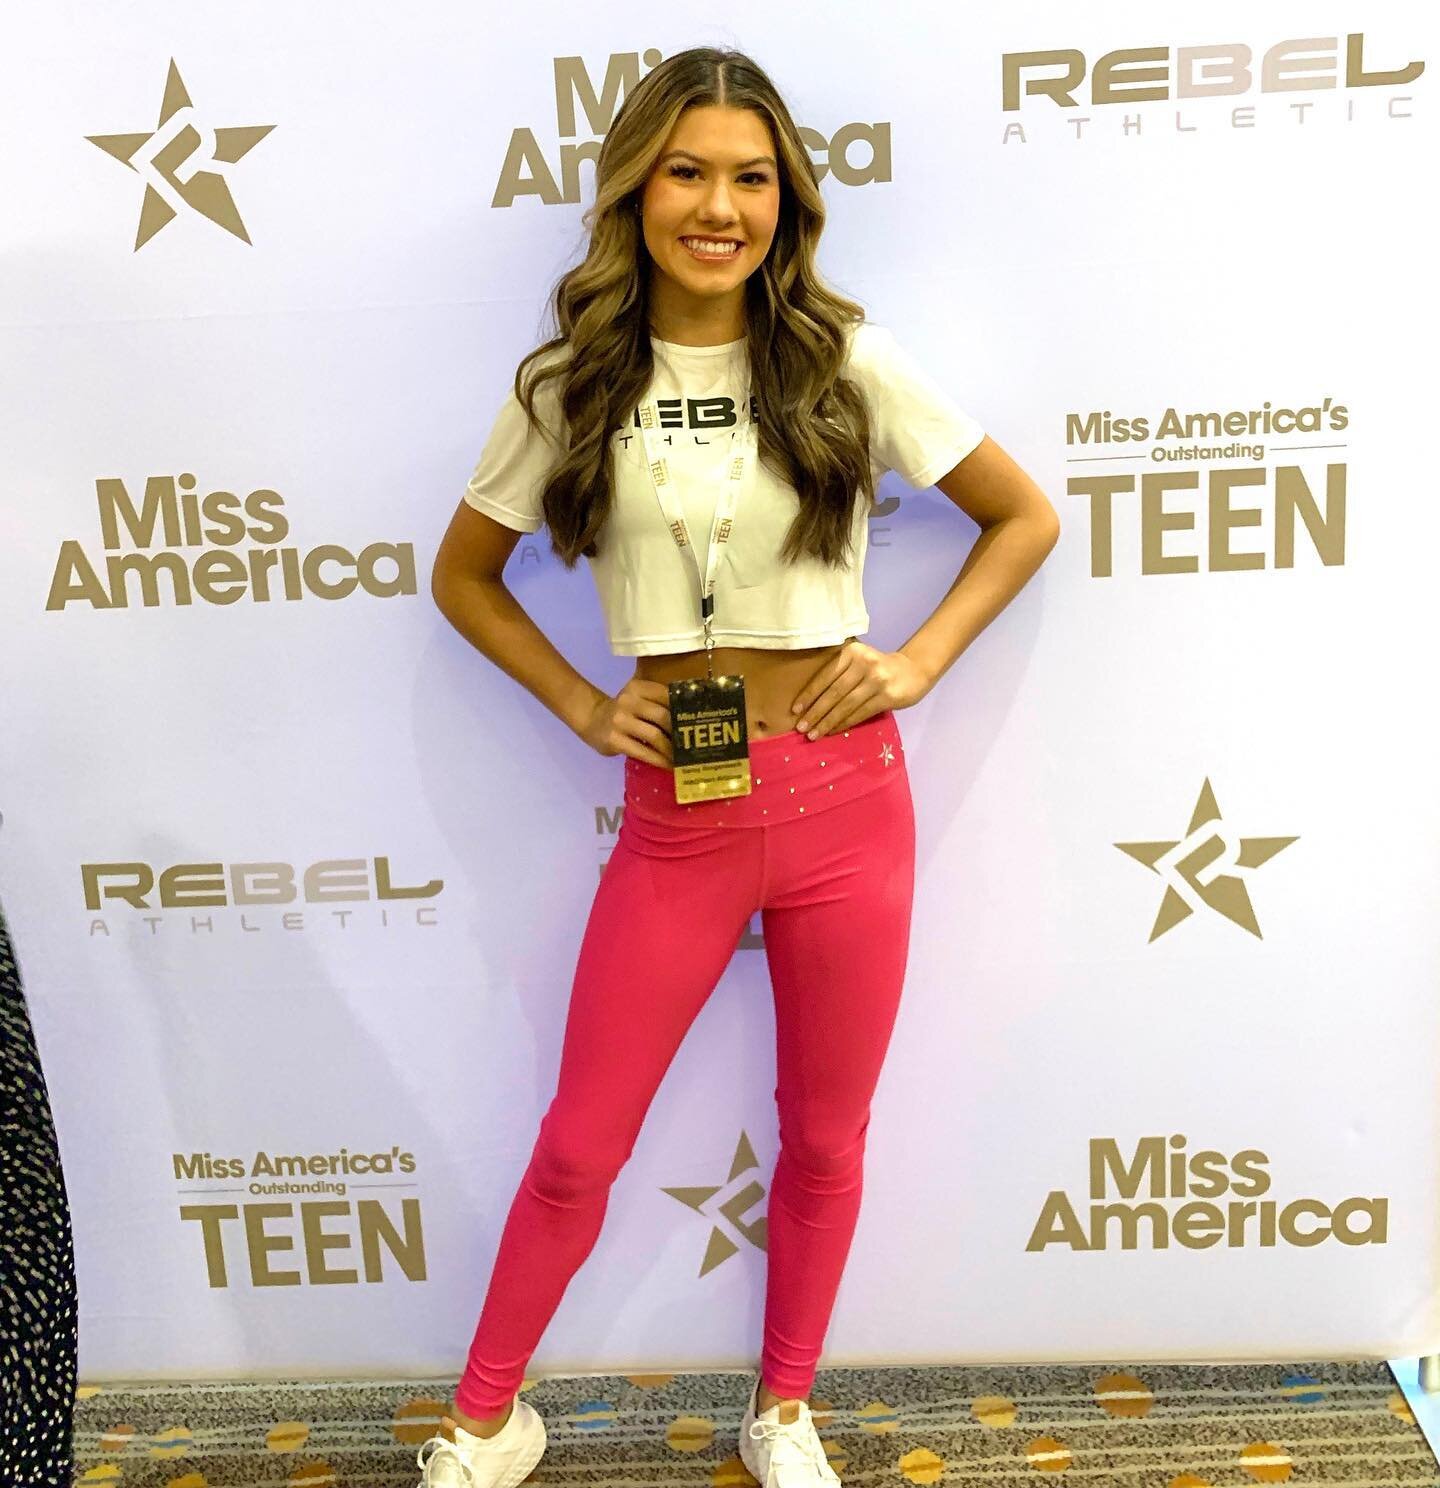 @maoteenaz is ready for day two in Dallas! Saray is ready for rehearsals, spending the day with her #MAOTeen sisters and looking amAZing in her @rebelathletic attire!🌵 
.
.
#MAOTeen #MAZOT #rebelathleticgirls #rebelathletic #sarayofsunshine